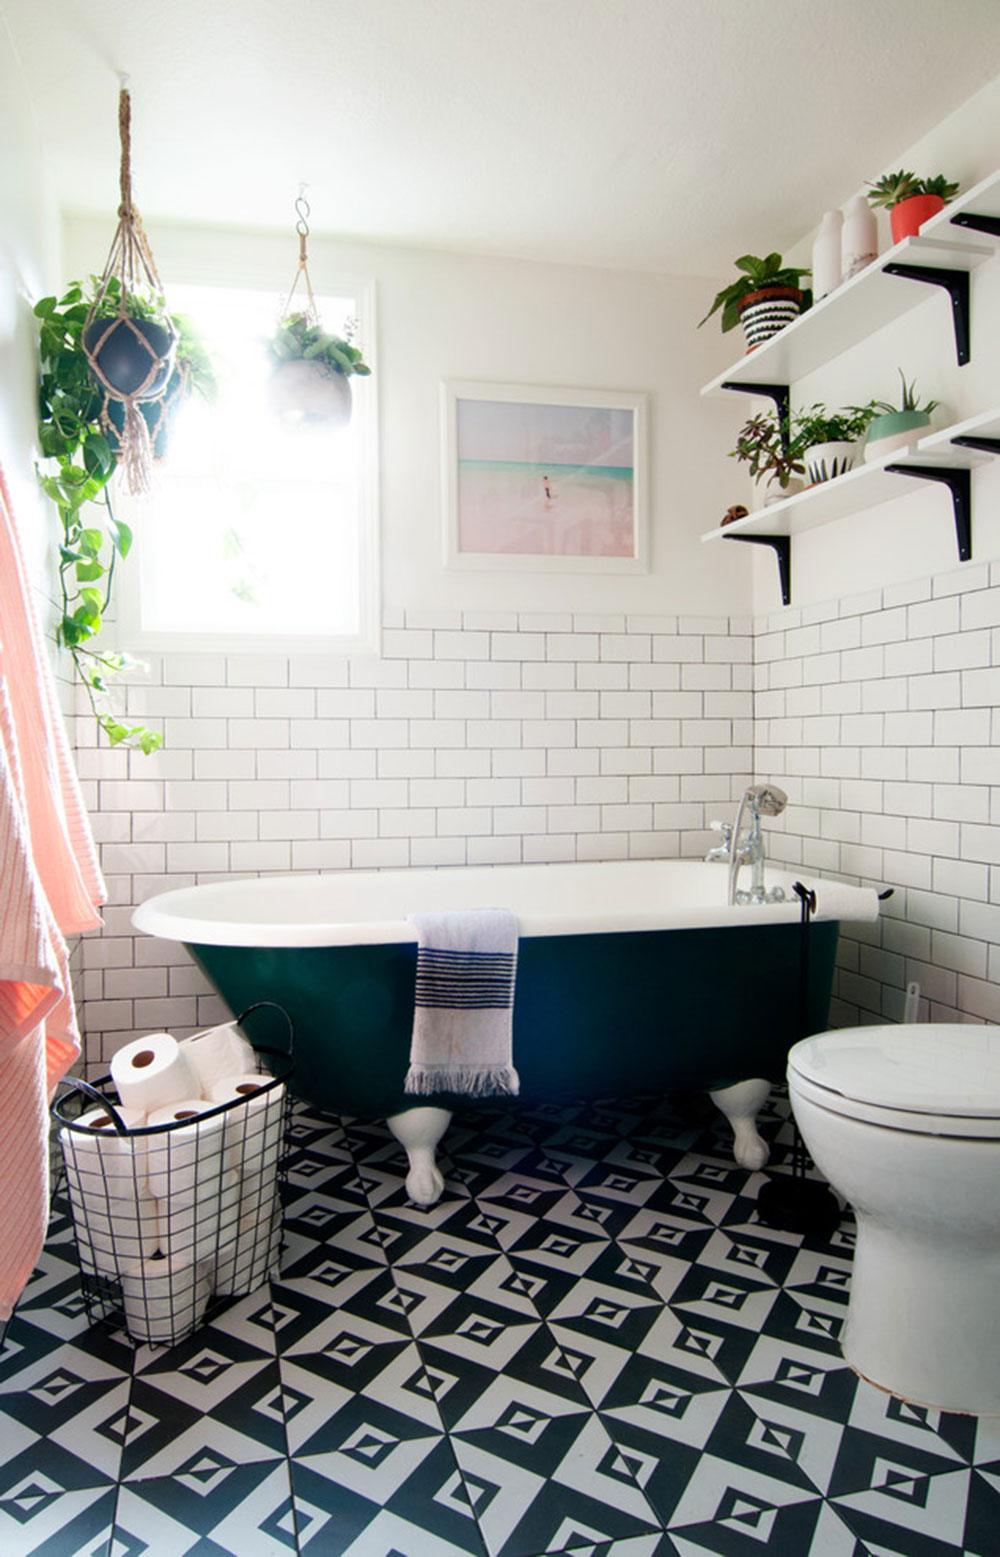 My-Houzz-Eclectic-Bohemian-Style-in-a-1976-Fixer-Upper-by-Alexandra-Crafton Bathroom décor ideas you should try in your home